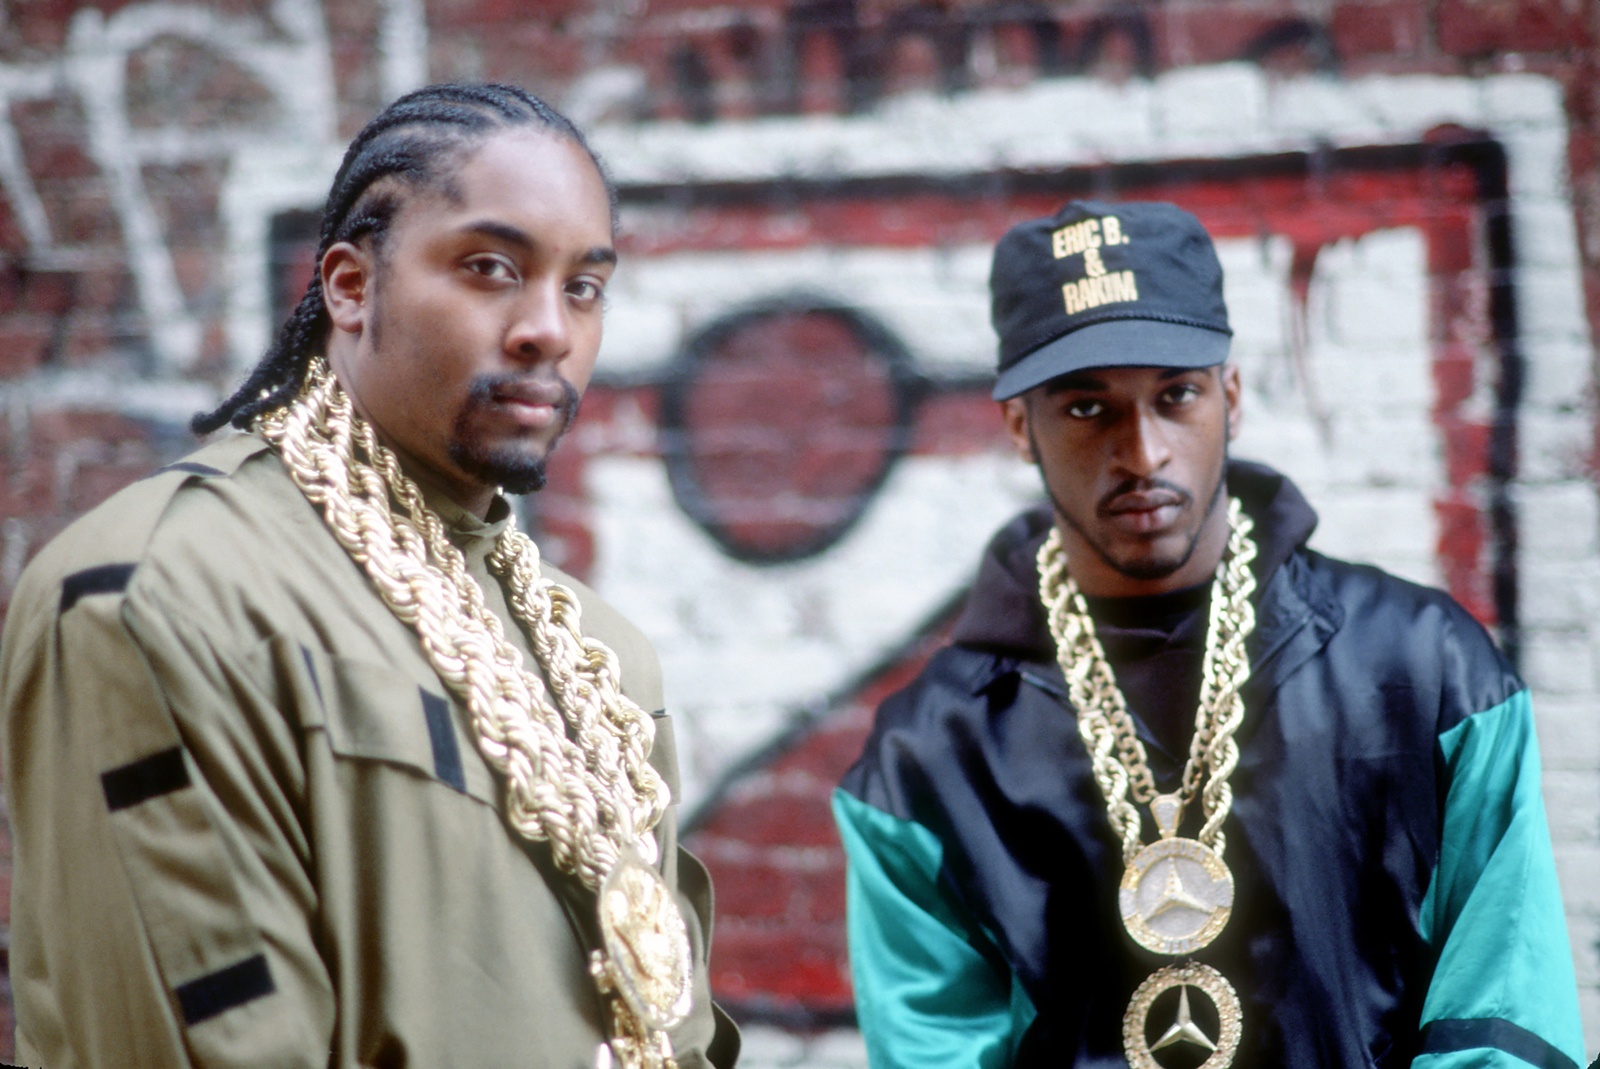 UNSPECIFIED - JANUARY 01: Photo of Eric B & Rakim Photo by Michael Ochs Archives/Getty Images